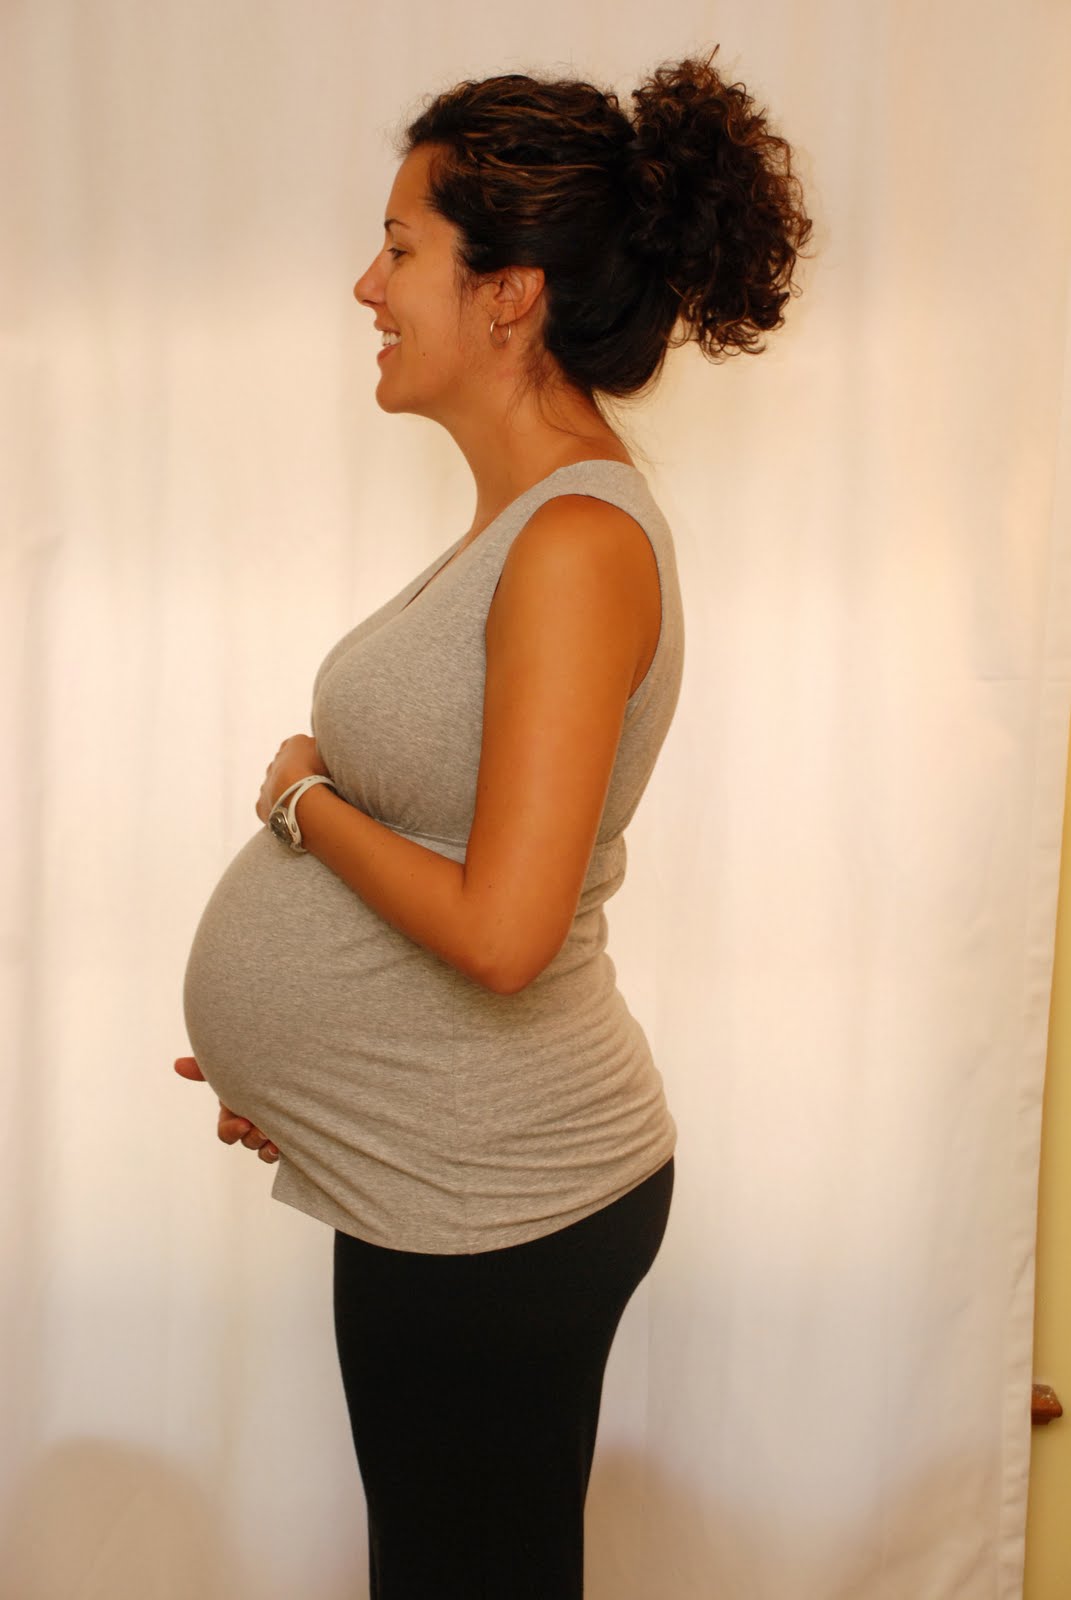 Is Your Baby Fully Developed At 38 Weeks?